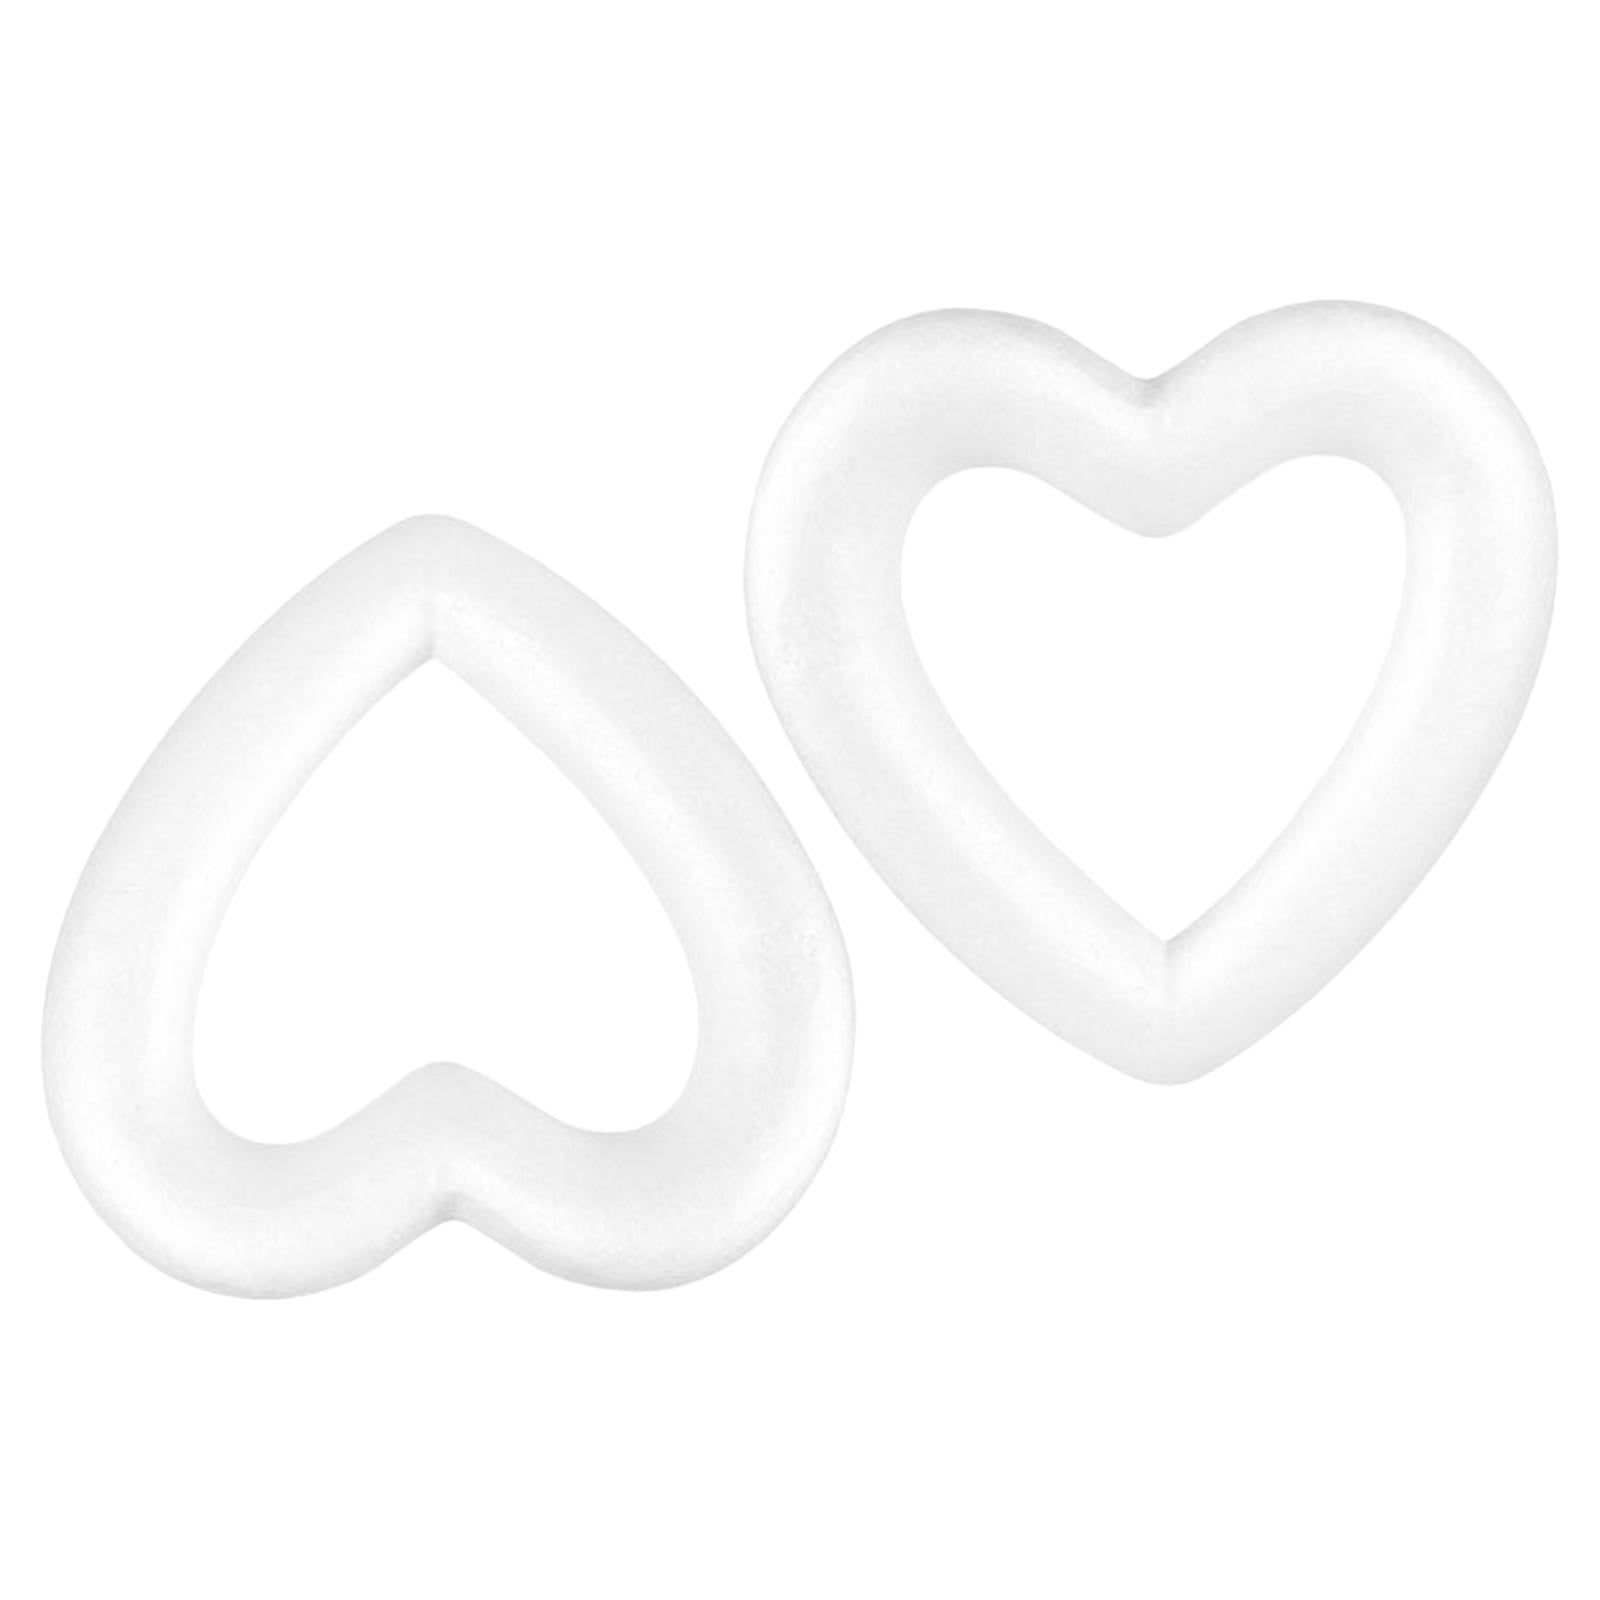 Foam Hearts - Hollow Shapes Wreath Crafts Ball Love Shaped